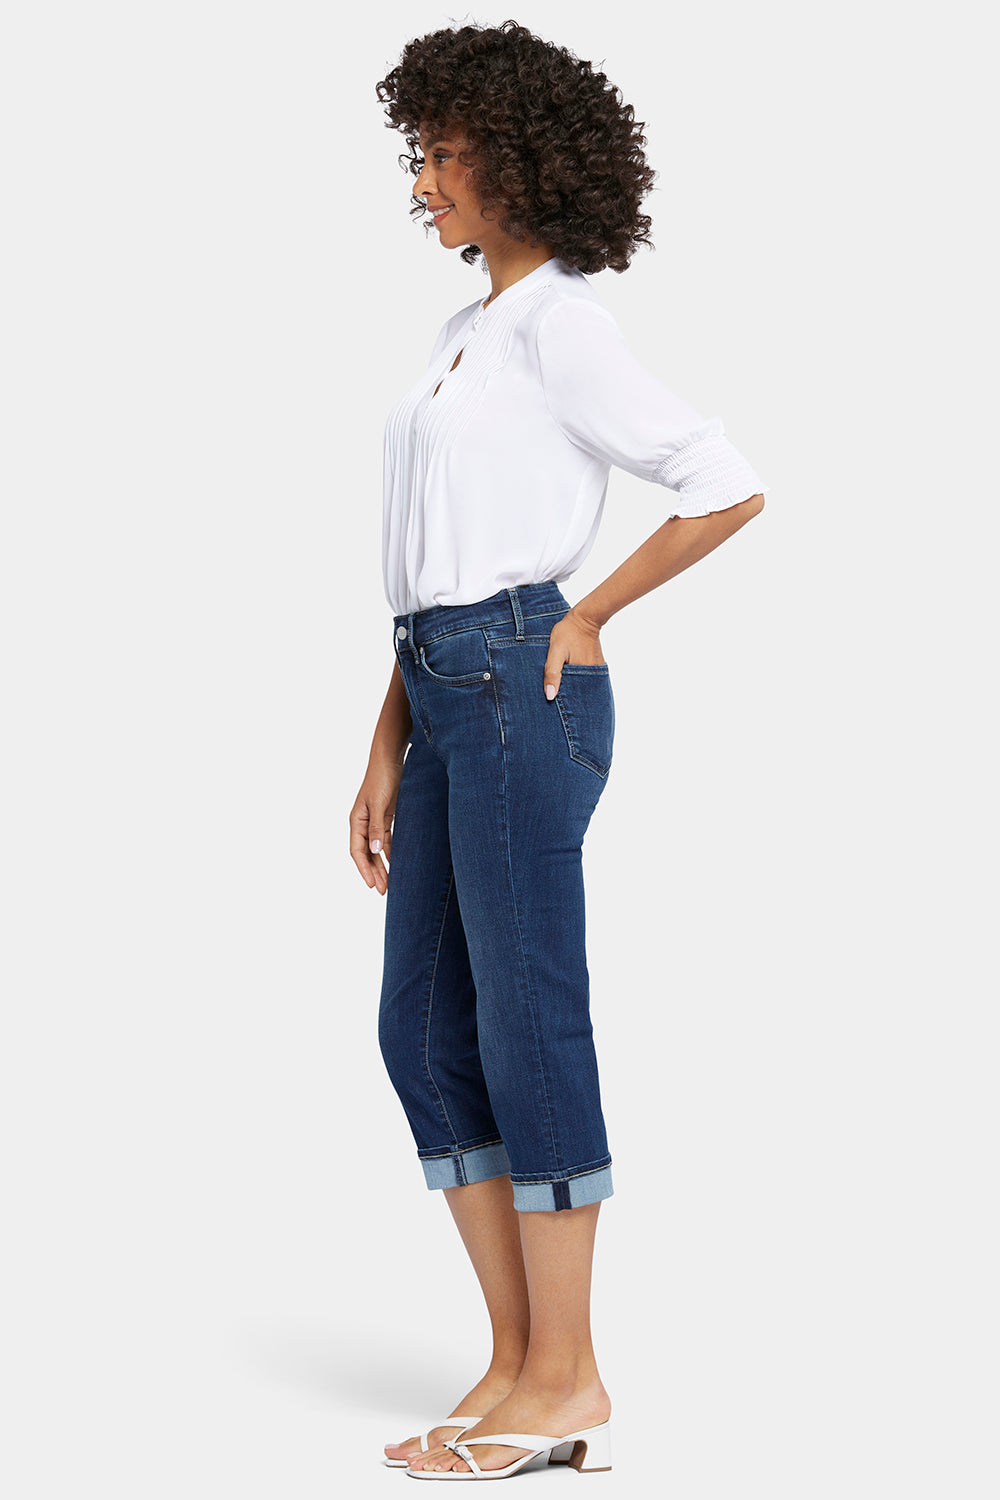 NYDJ Marilyn Straight Crop Jeans In Petite In Cool Embrace® Denim With Cuffs - Cambridge